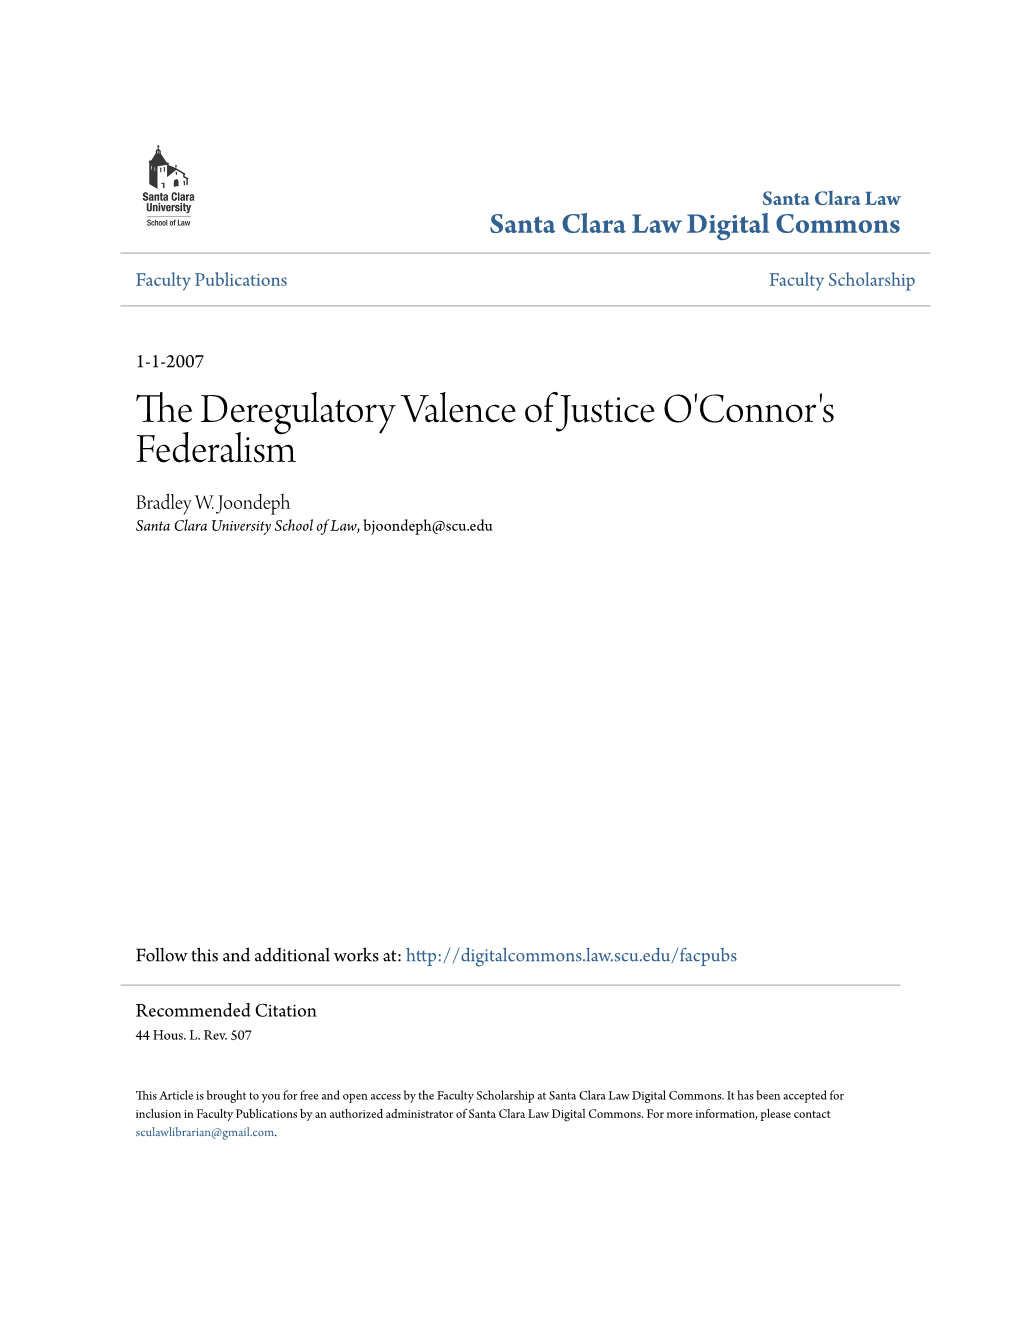 The Deregulatory Valence of Justice O'connor's Federalism